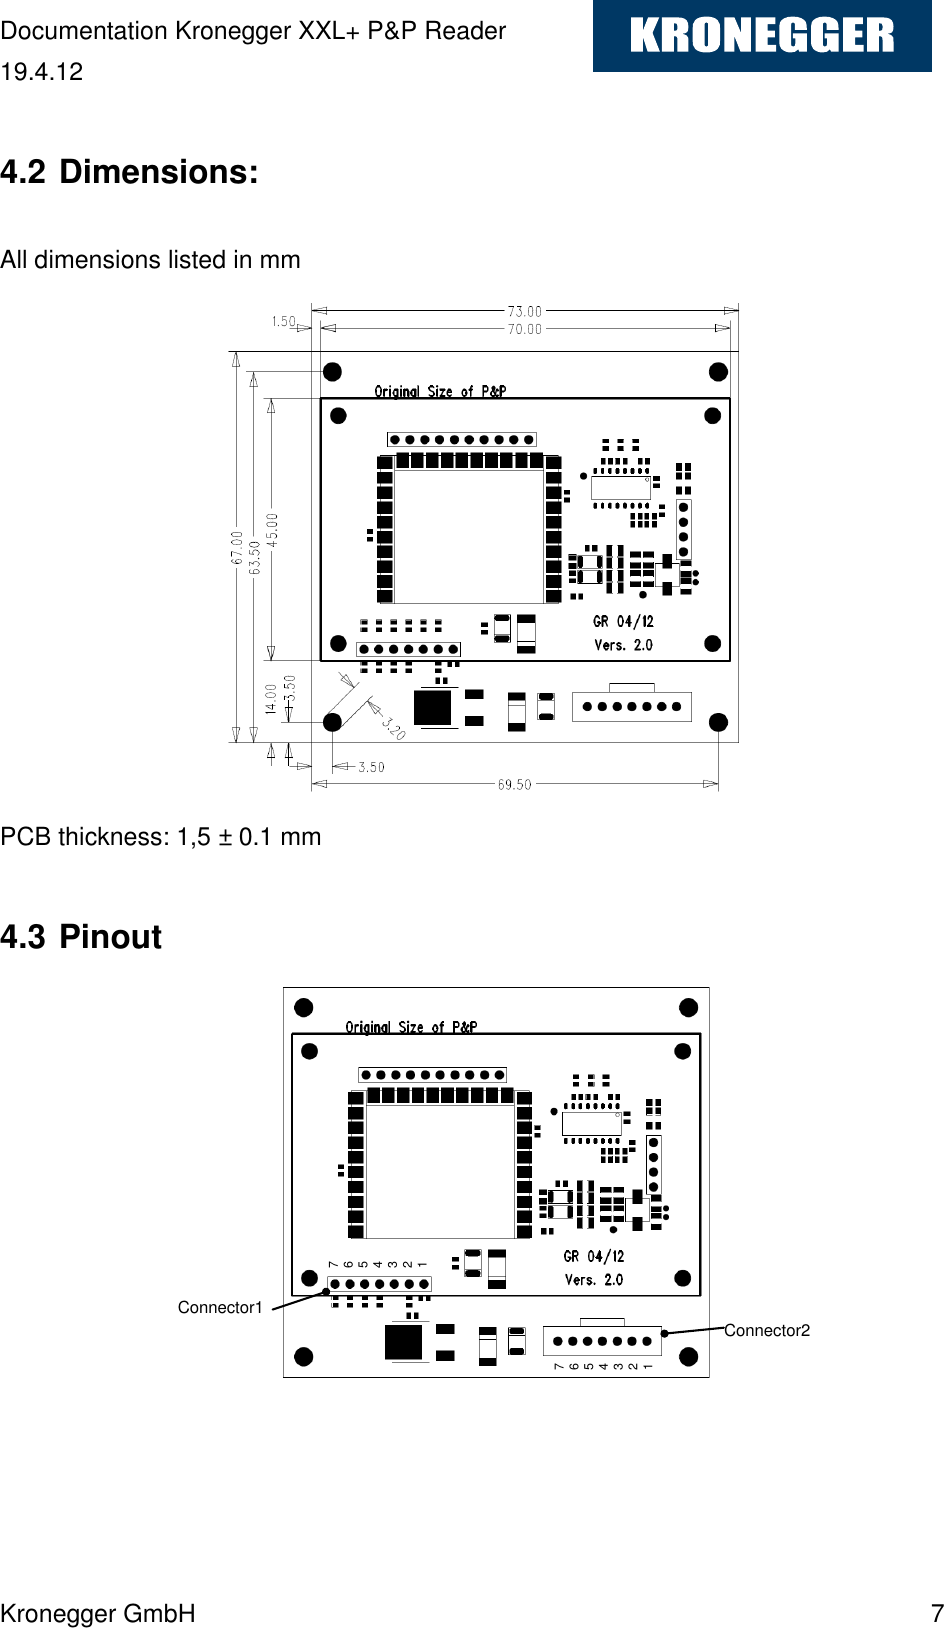 Documentation Kronegger XXL+ P&amp;P Reader 19.4.12 Kronegger GmbH    7  4.2 Dimensions:  All dimensions listed in mm              PCB thickness: 1,5 ± 0.1 mm  4.3 Pinout             Connector1 Connector2 7 6 5 4 3 2 1 7 6 5 4 3 2 1 